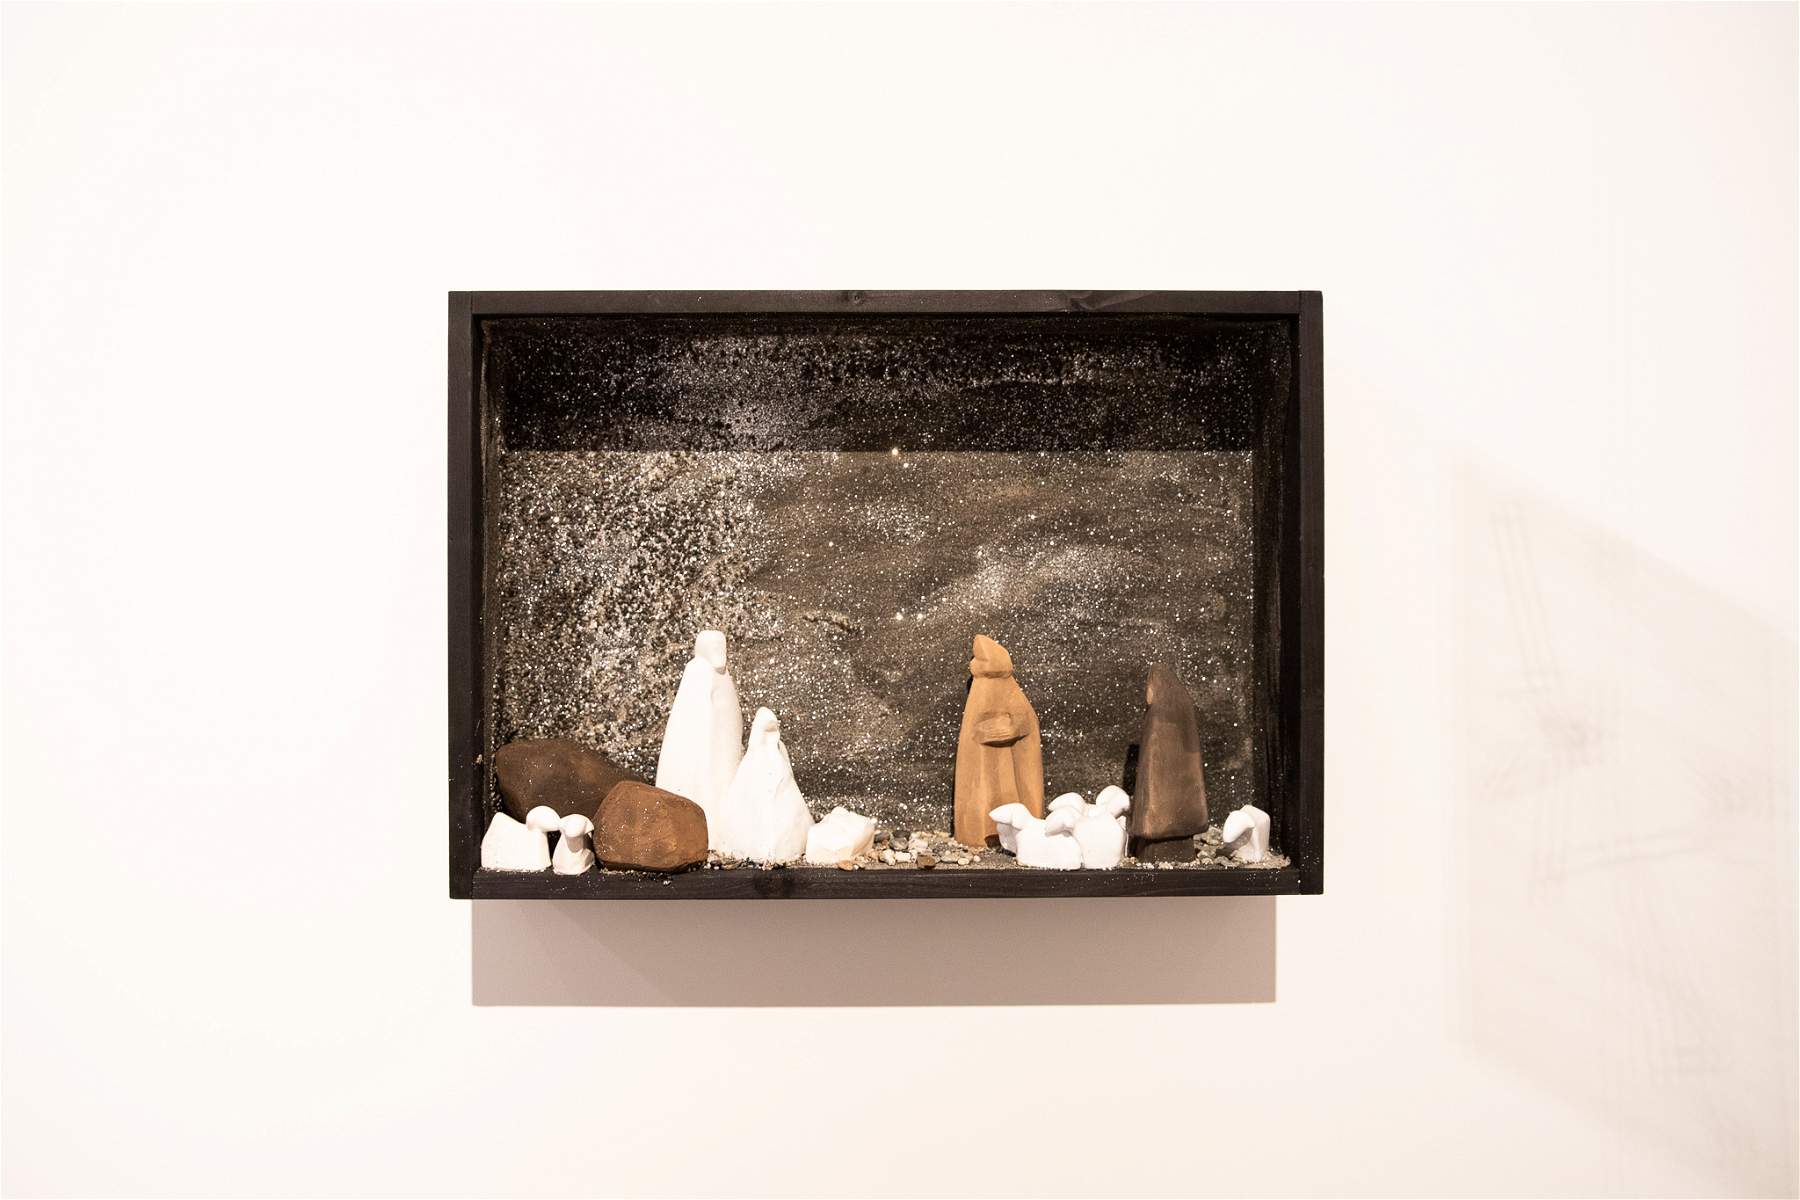 Florence: an exhibition dedicated to Maria Lai's nativity scenes at the Museo Novecento